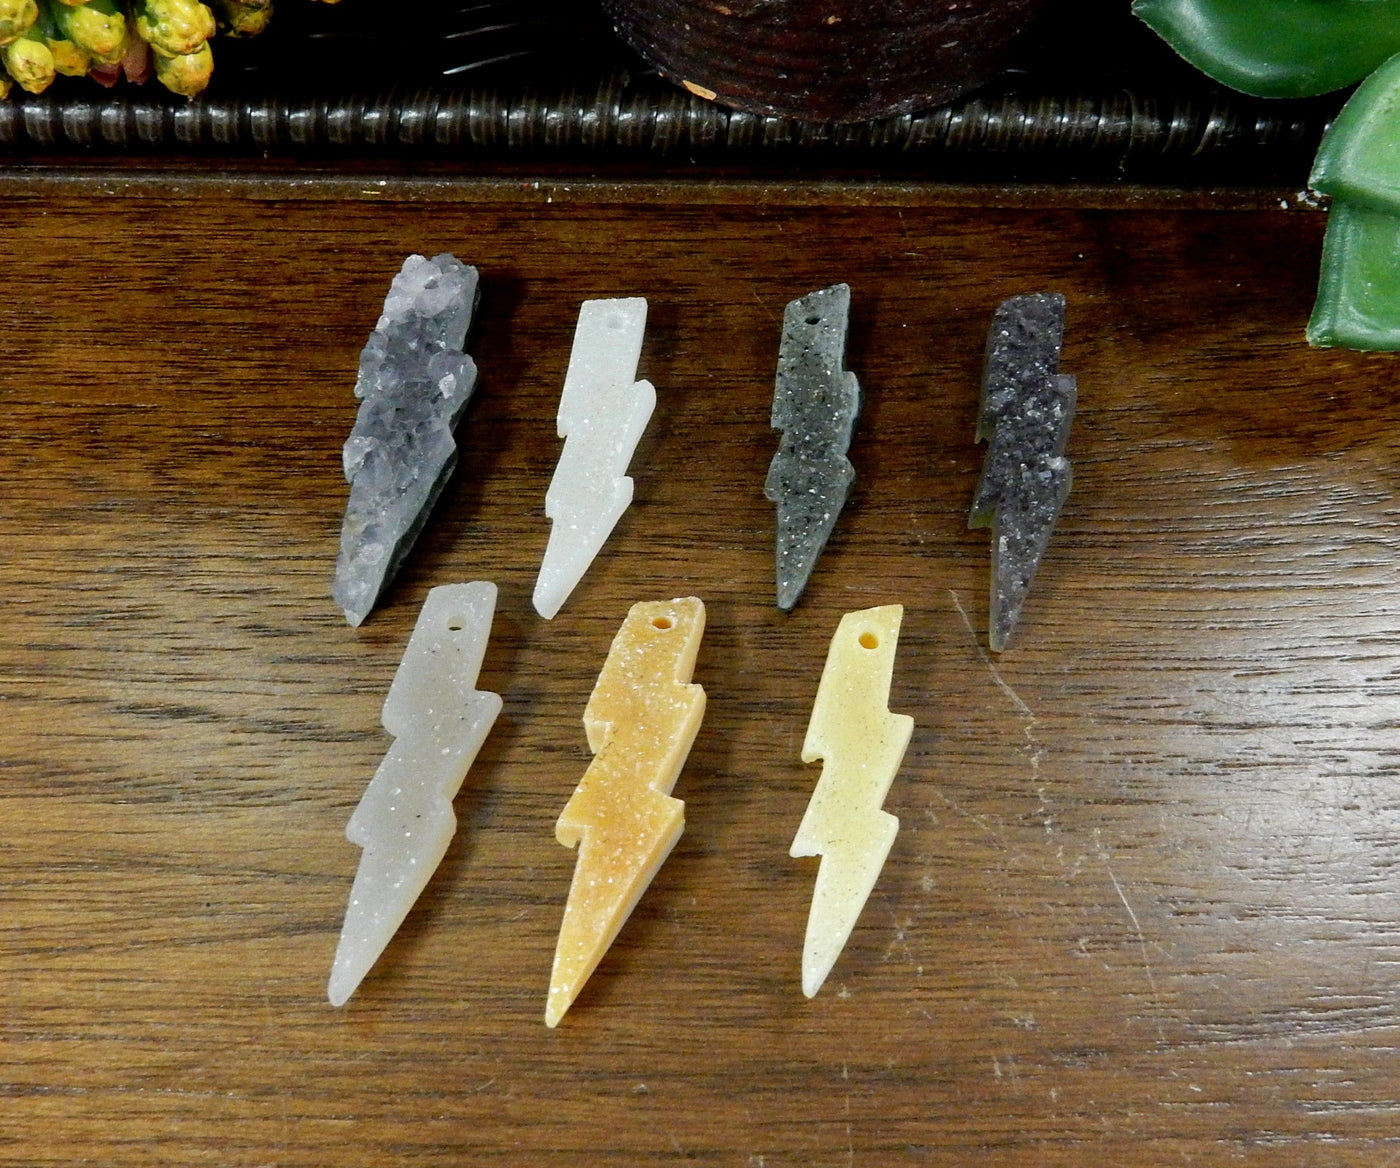 Natural druzy lightning bolt beads displayed side view for thickness reference and texture differences